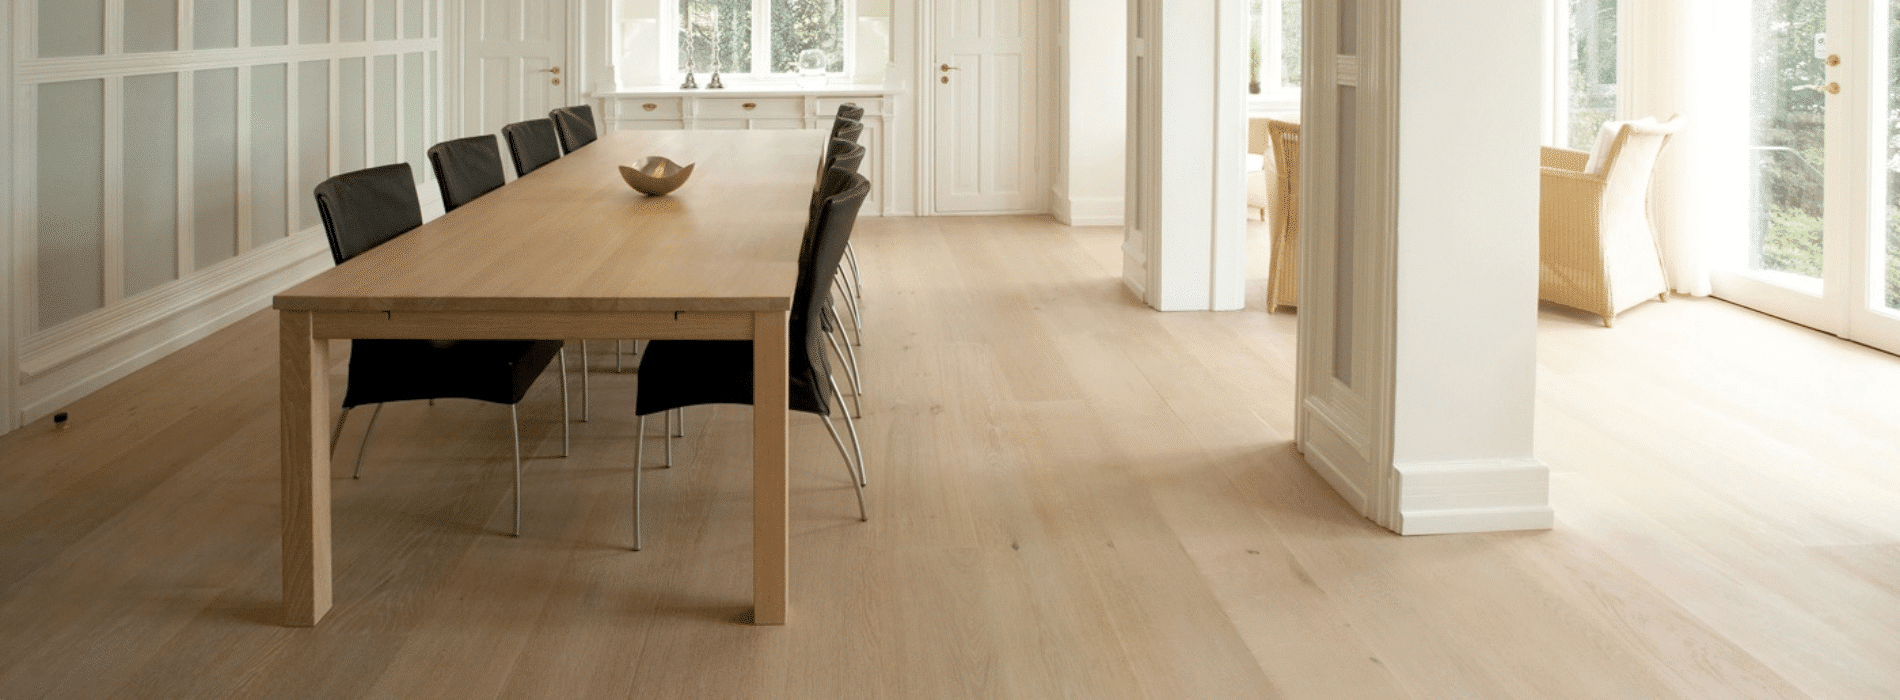 Expertly restored 7-year-old hardwood floor in Coulsdon, CR5. Mr Sander® used Bona 2.5K Frost whitewashing and Traffic HD 16% sheen matte lacquer. Durable and stunning, this finish guarantees long-lasting beauty. 